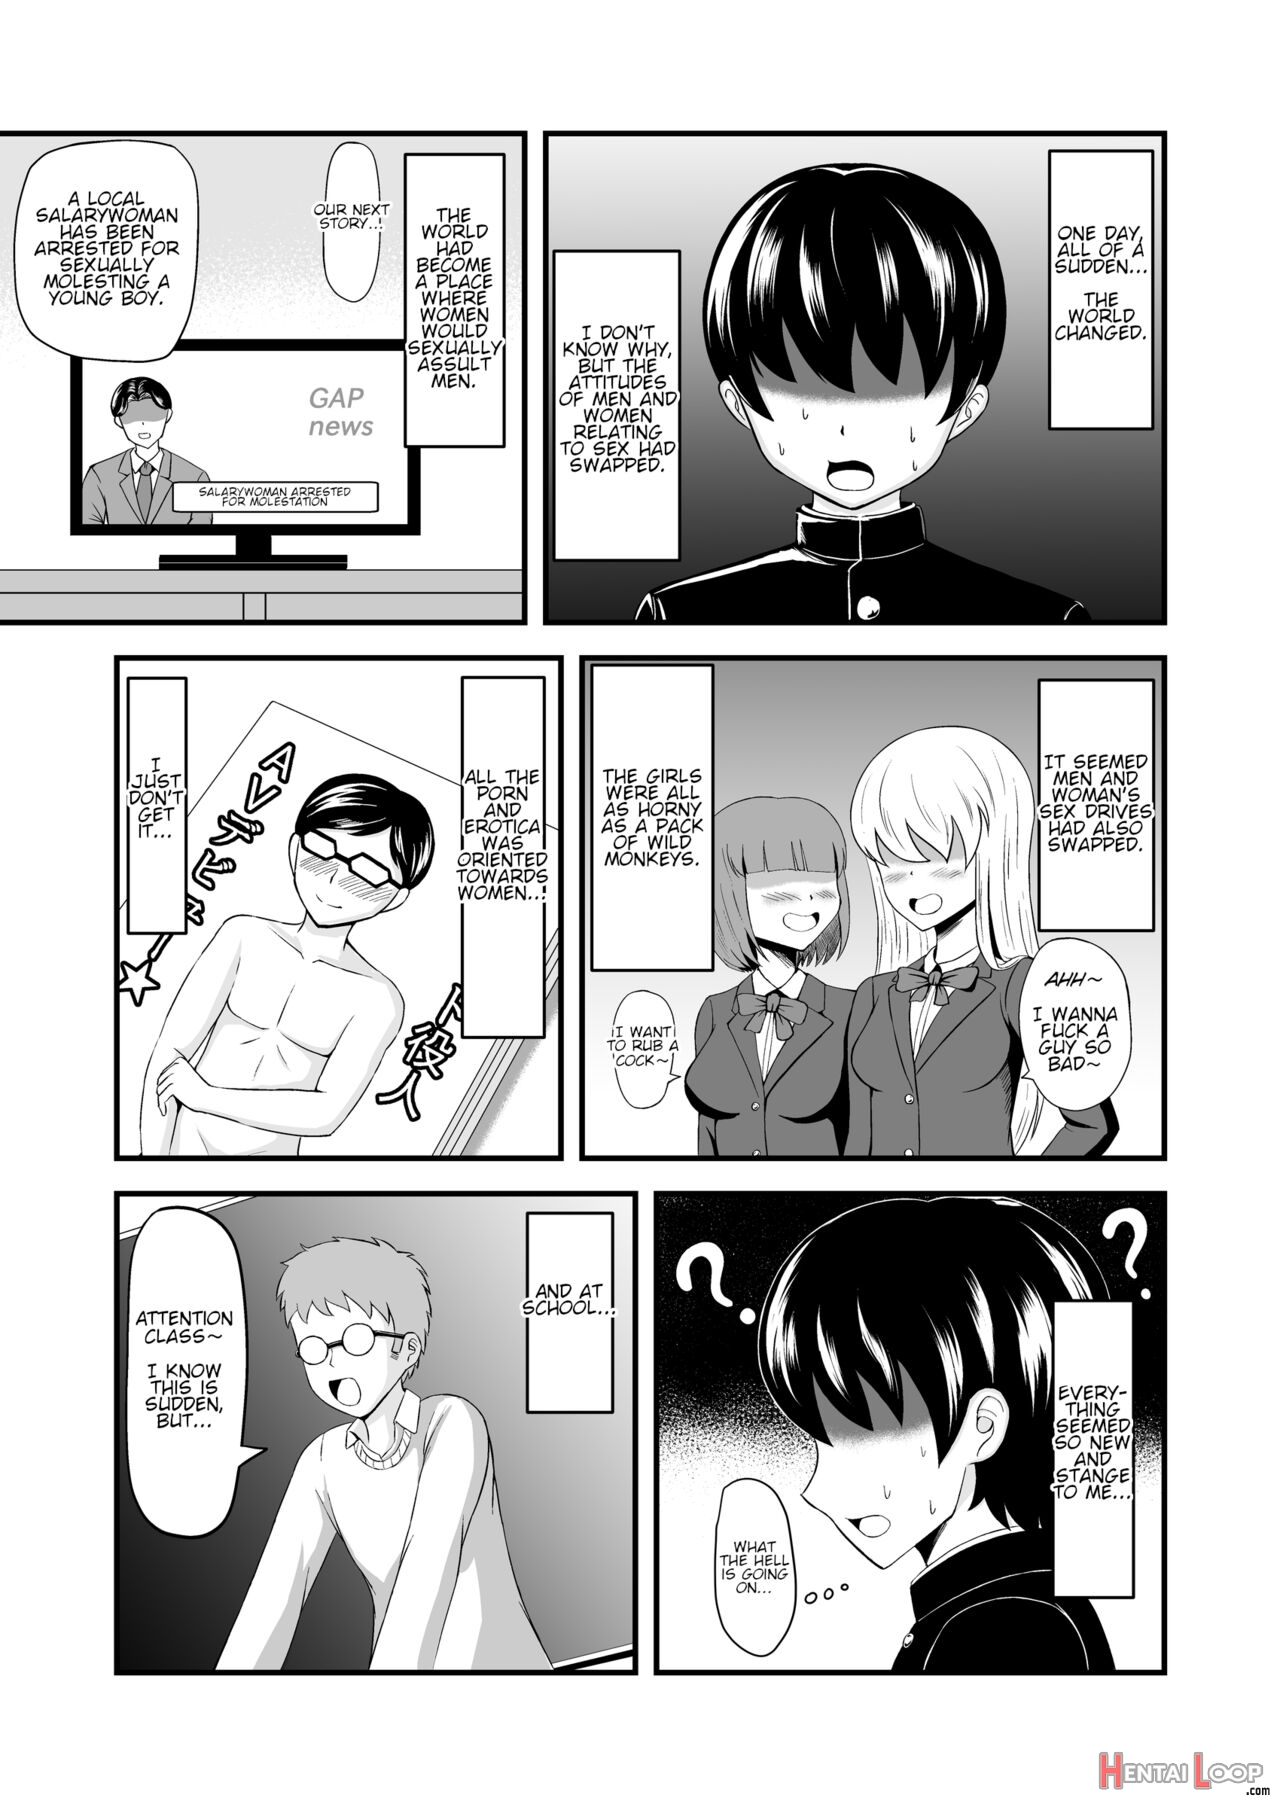 A Tale Of Reversed Gender Roles page 2